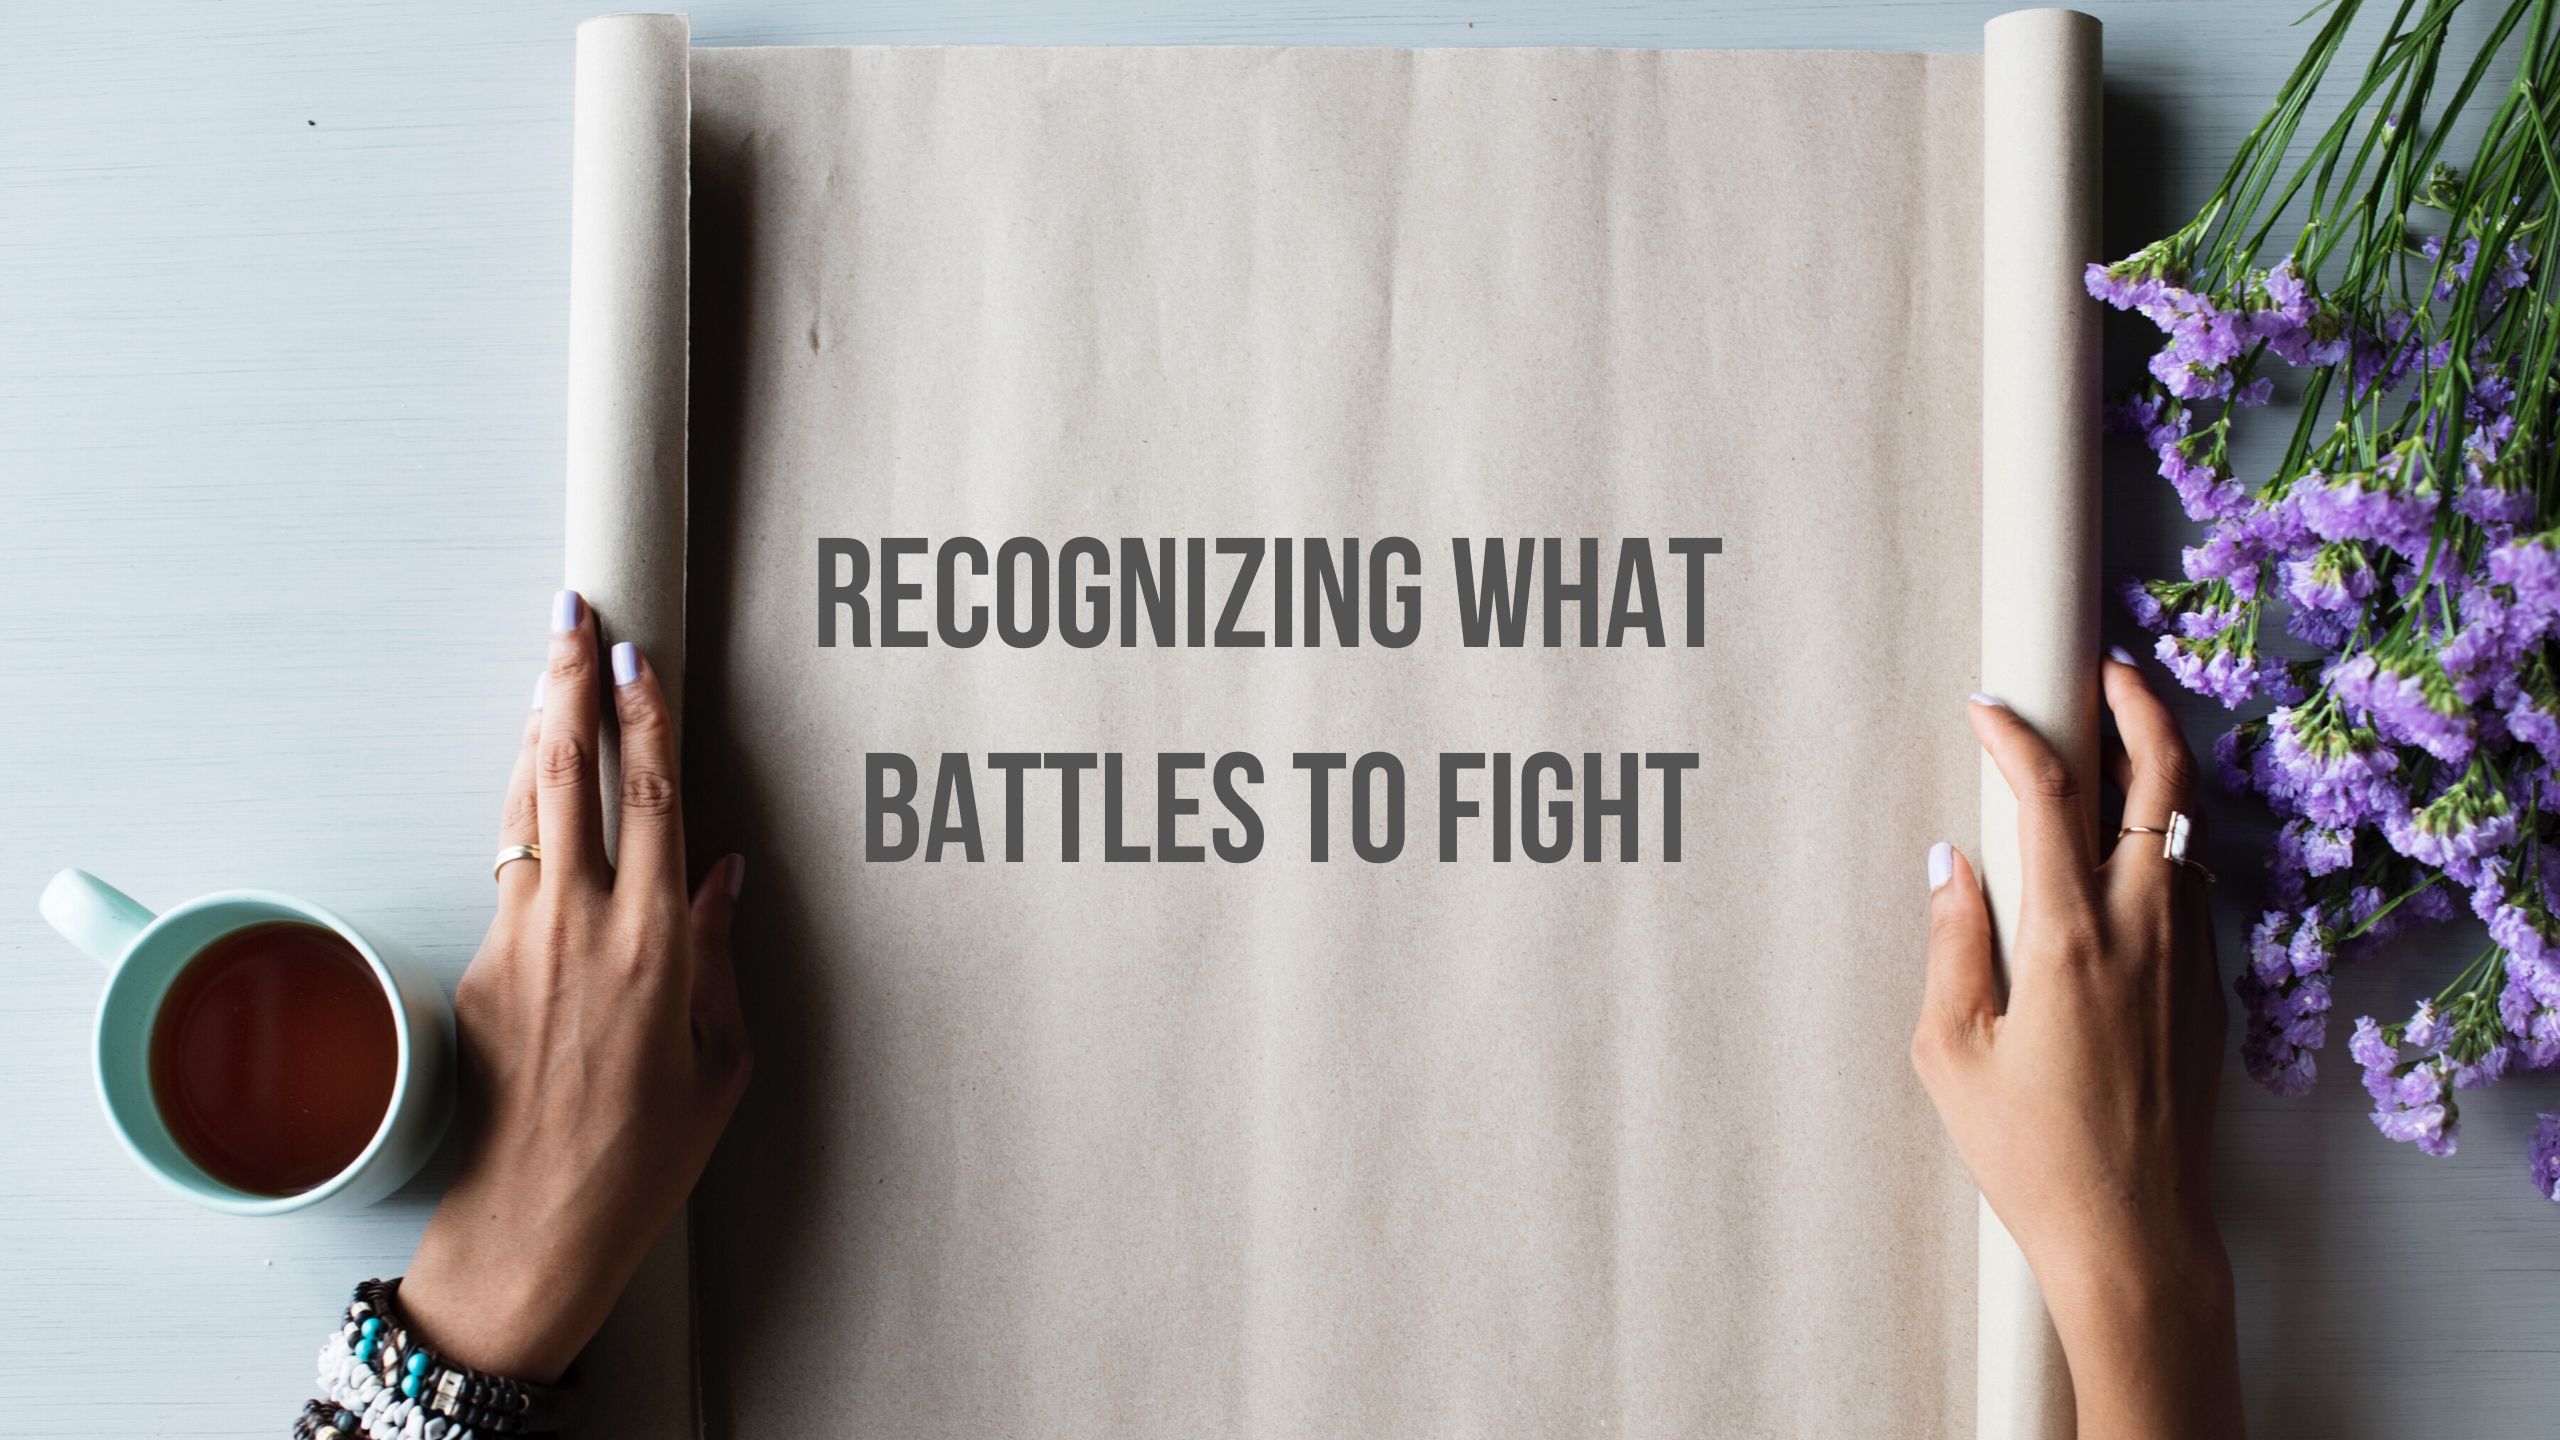 Recognizing What Battles to Fight